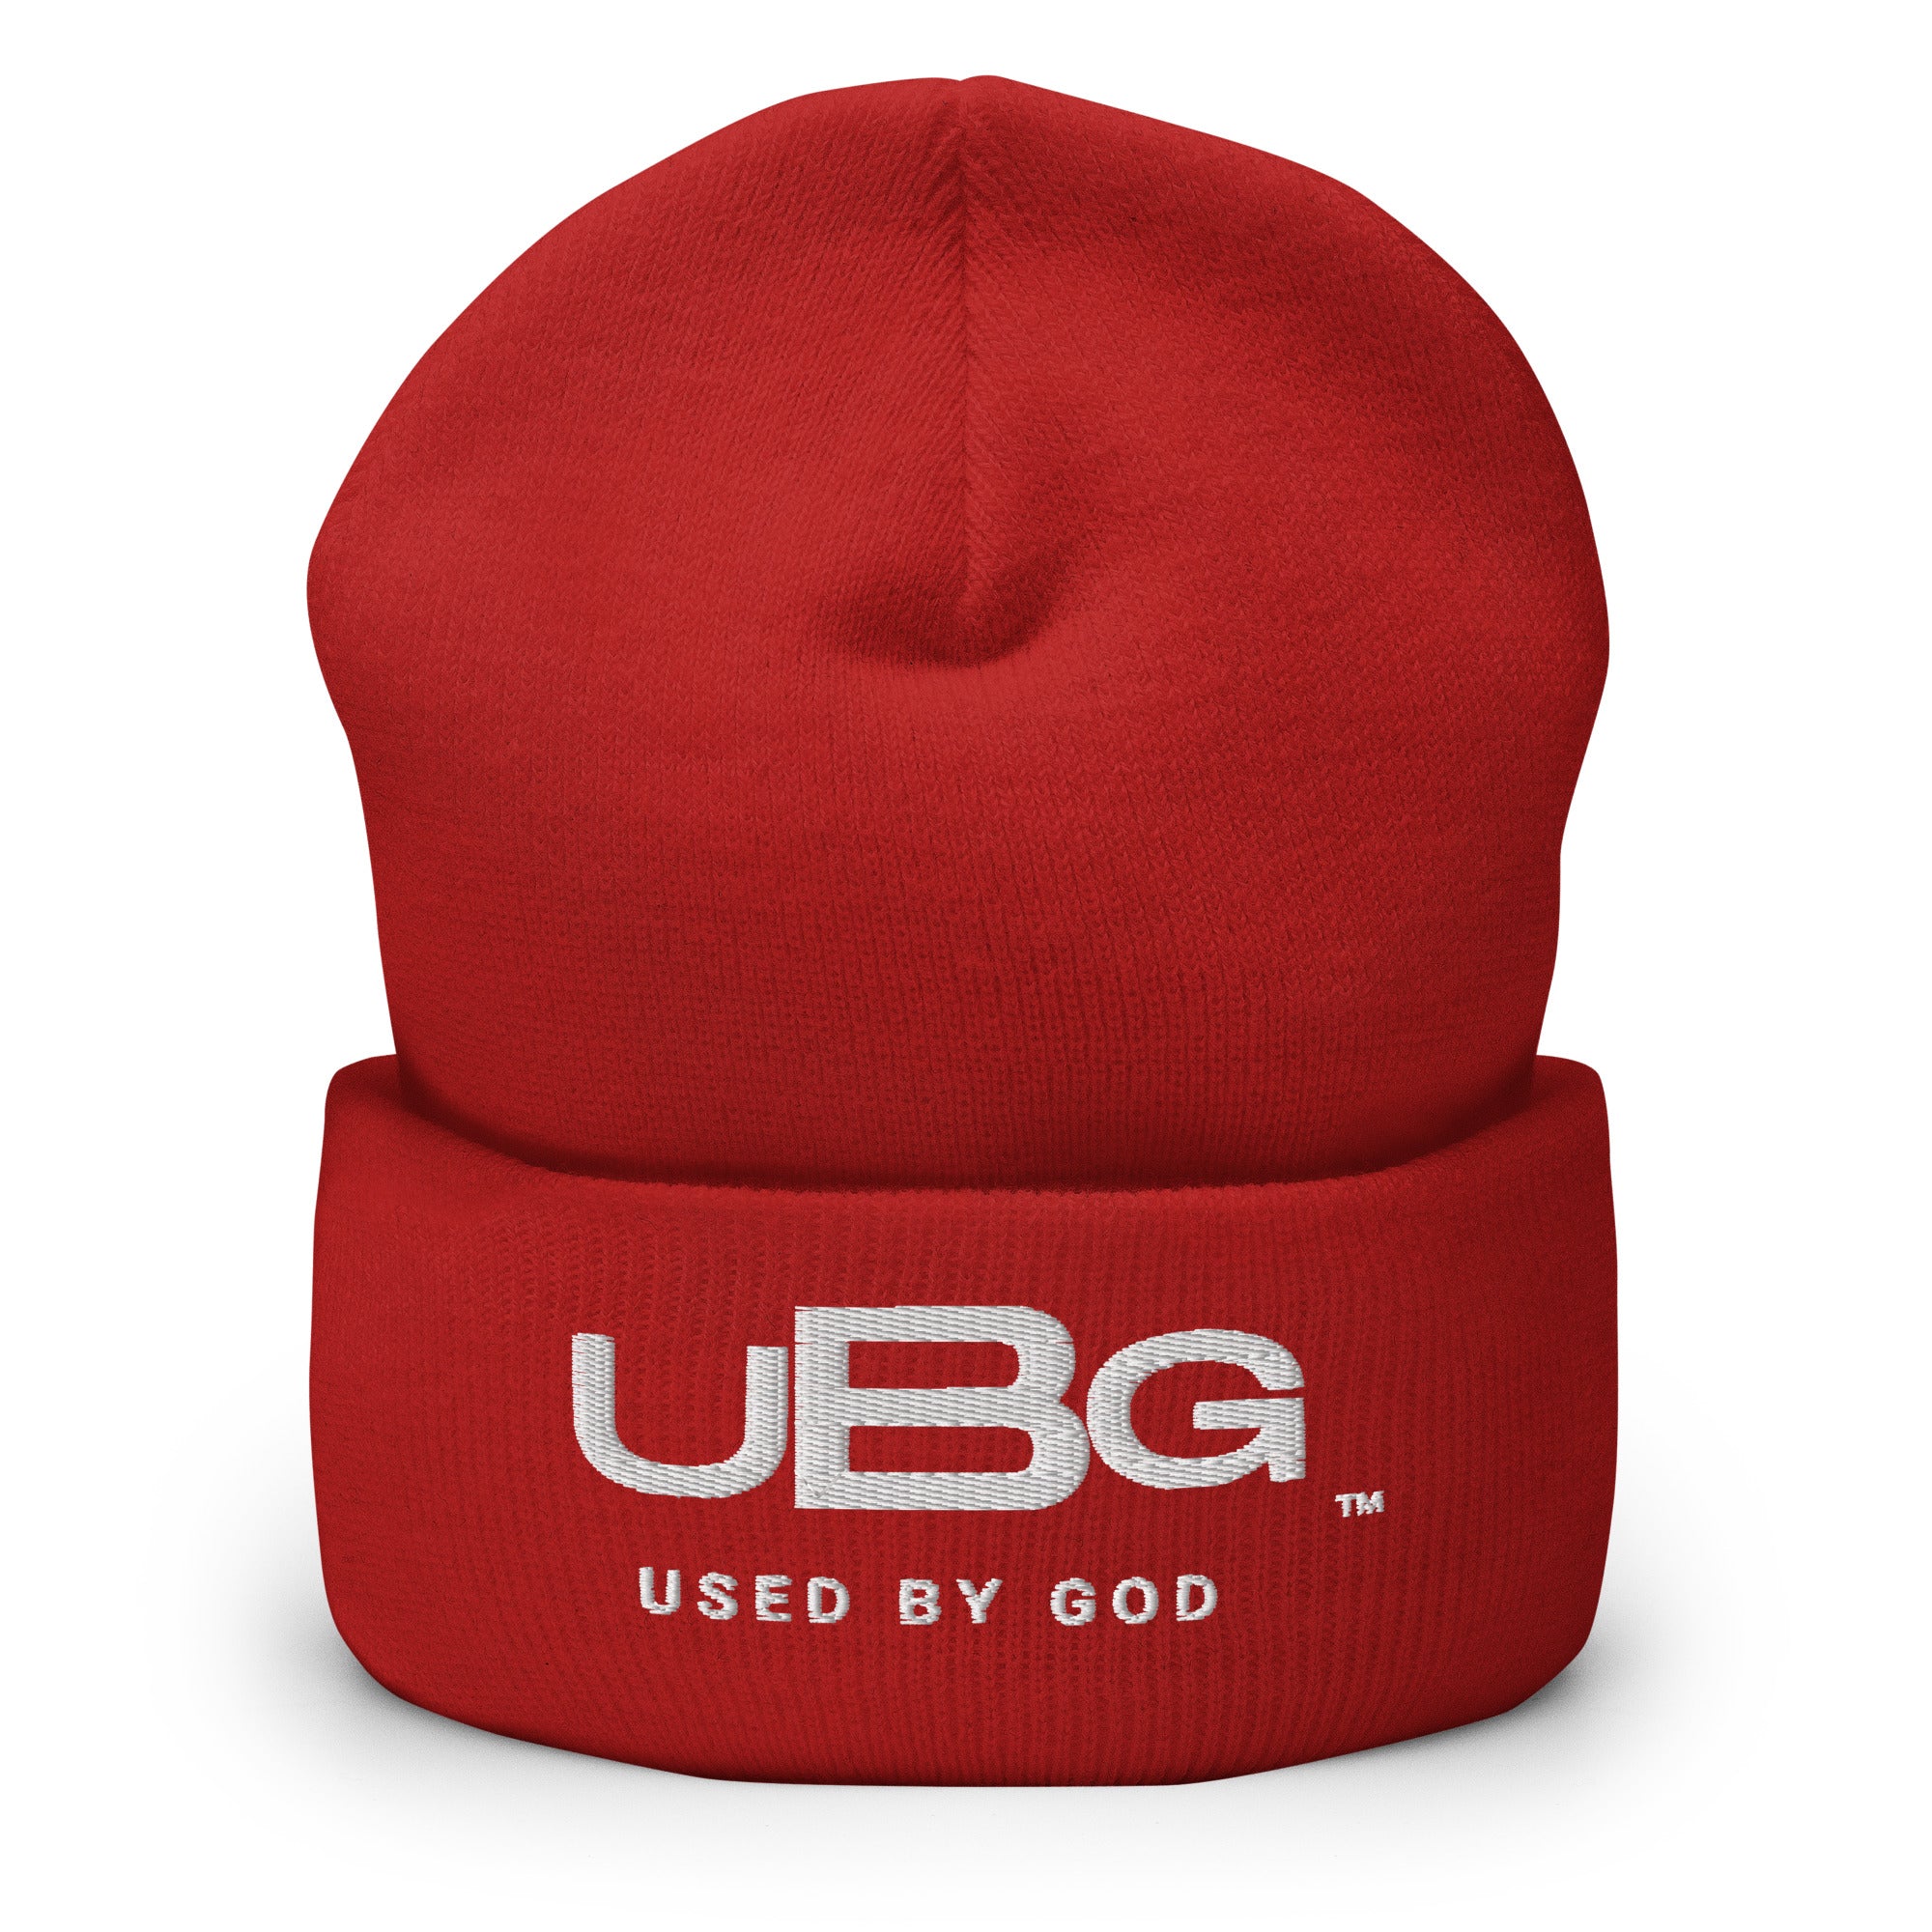 Used By God Cuffed Beanie, Used By God, Used By God Clothing, Christian Apparel, Christian Hats, Christian T-Shirts, Christian Clothing, God Shirts, Christian Sweatshirts, God Clothing, Jesus Hoodie, Jesus Clothes, God Is Dope, Art Of Homage, Red Letter Clothing, Elevated Faith, Active Faith Sports, Beacon Threads, God The Father Apparel